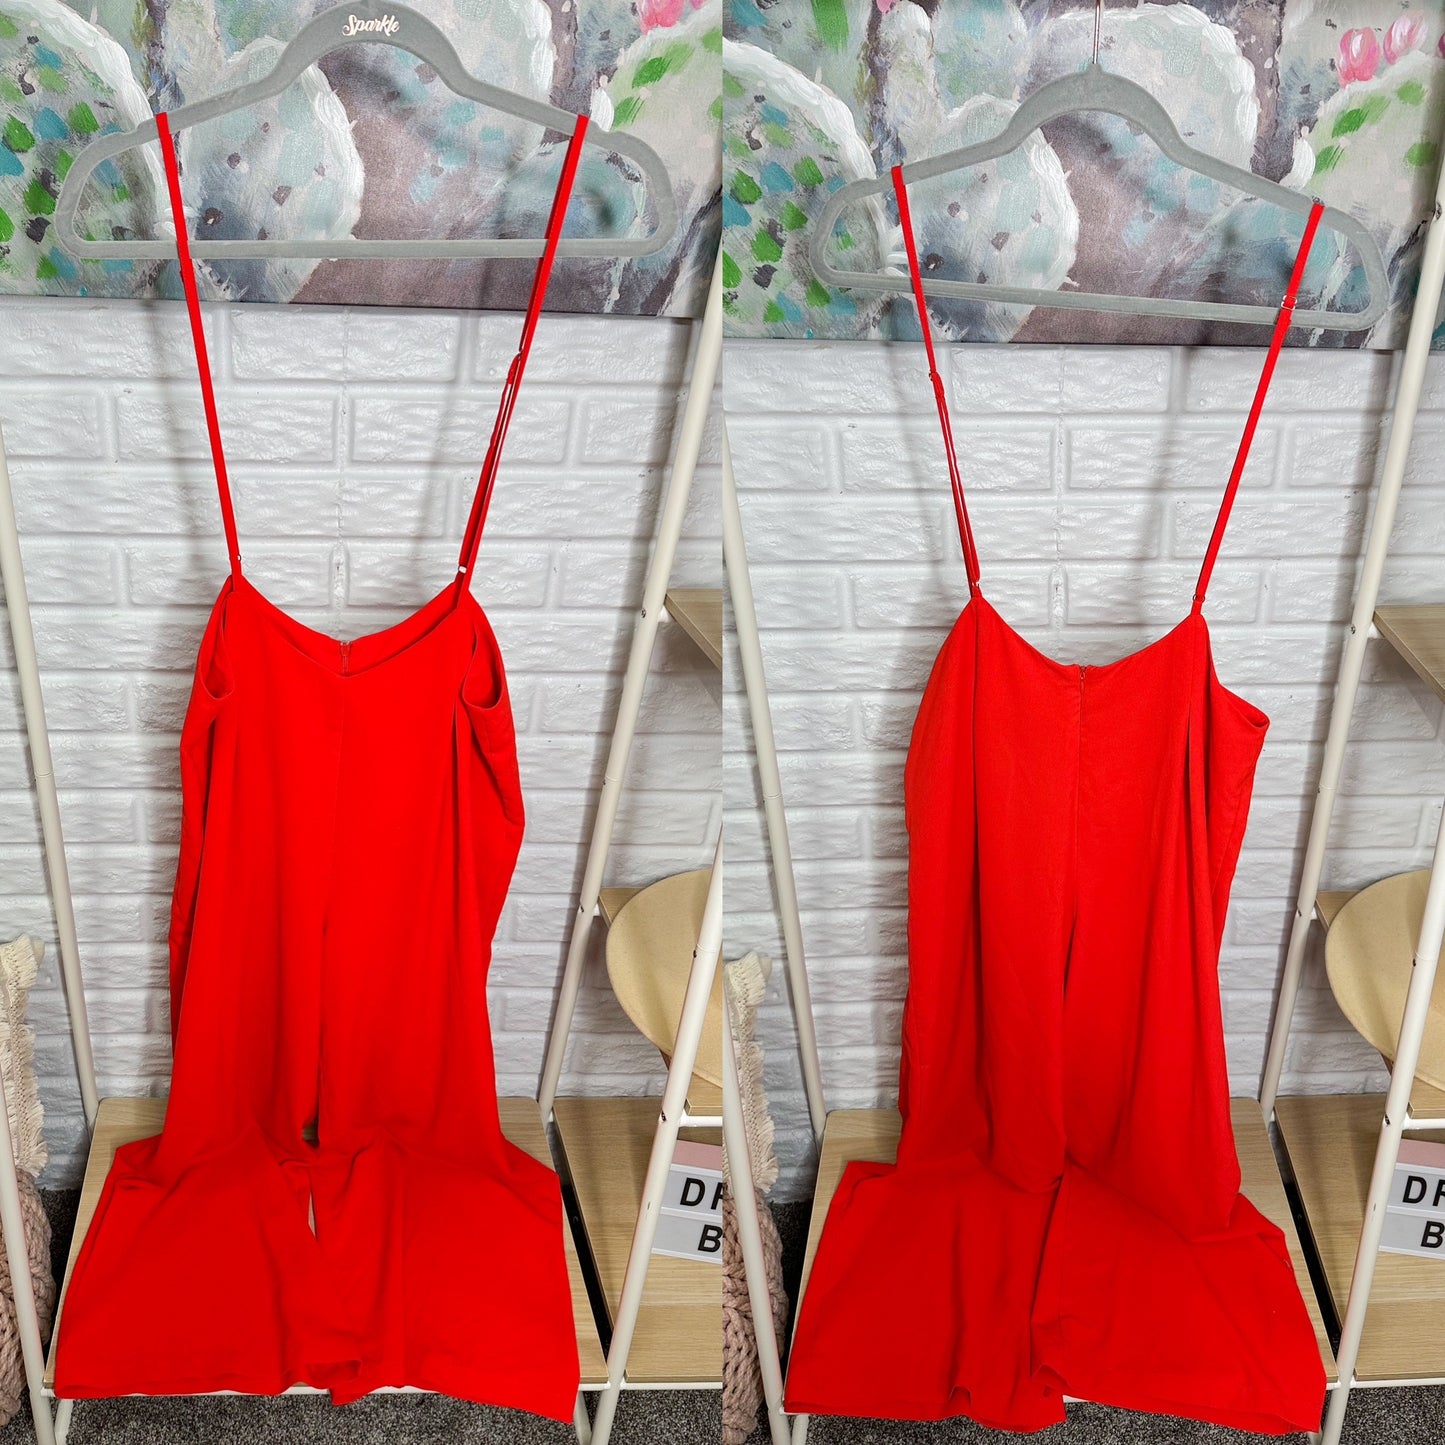 FSHAOES Red Suspender Overalls Size Large